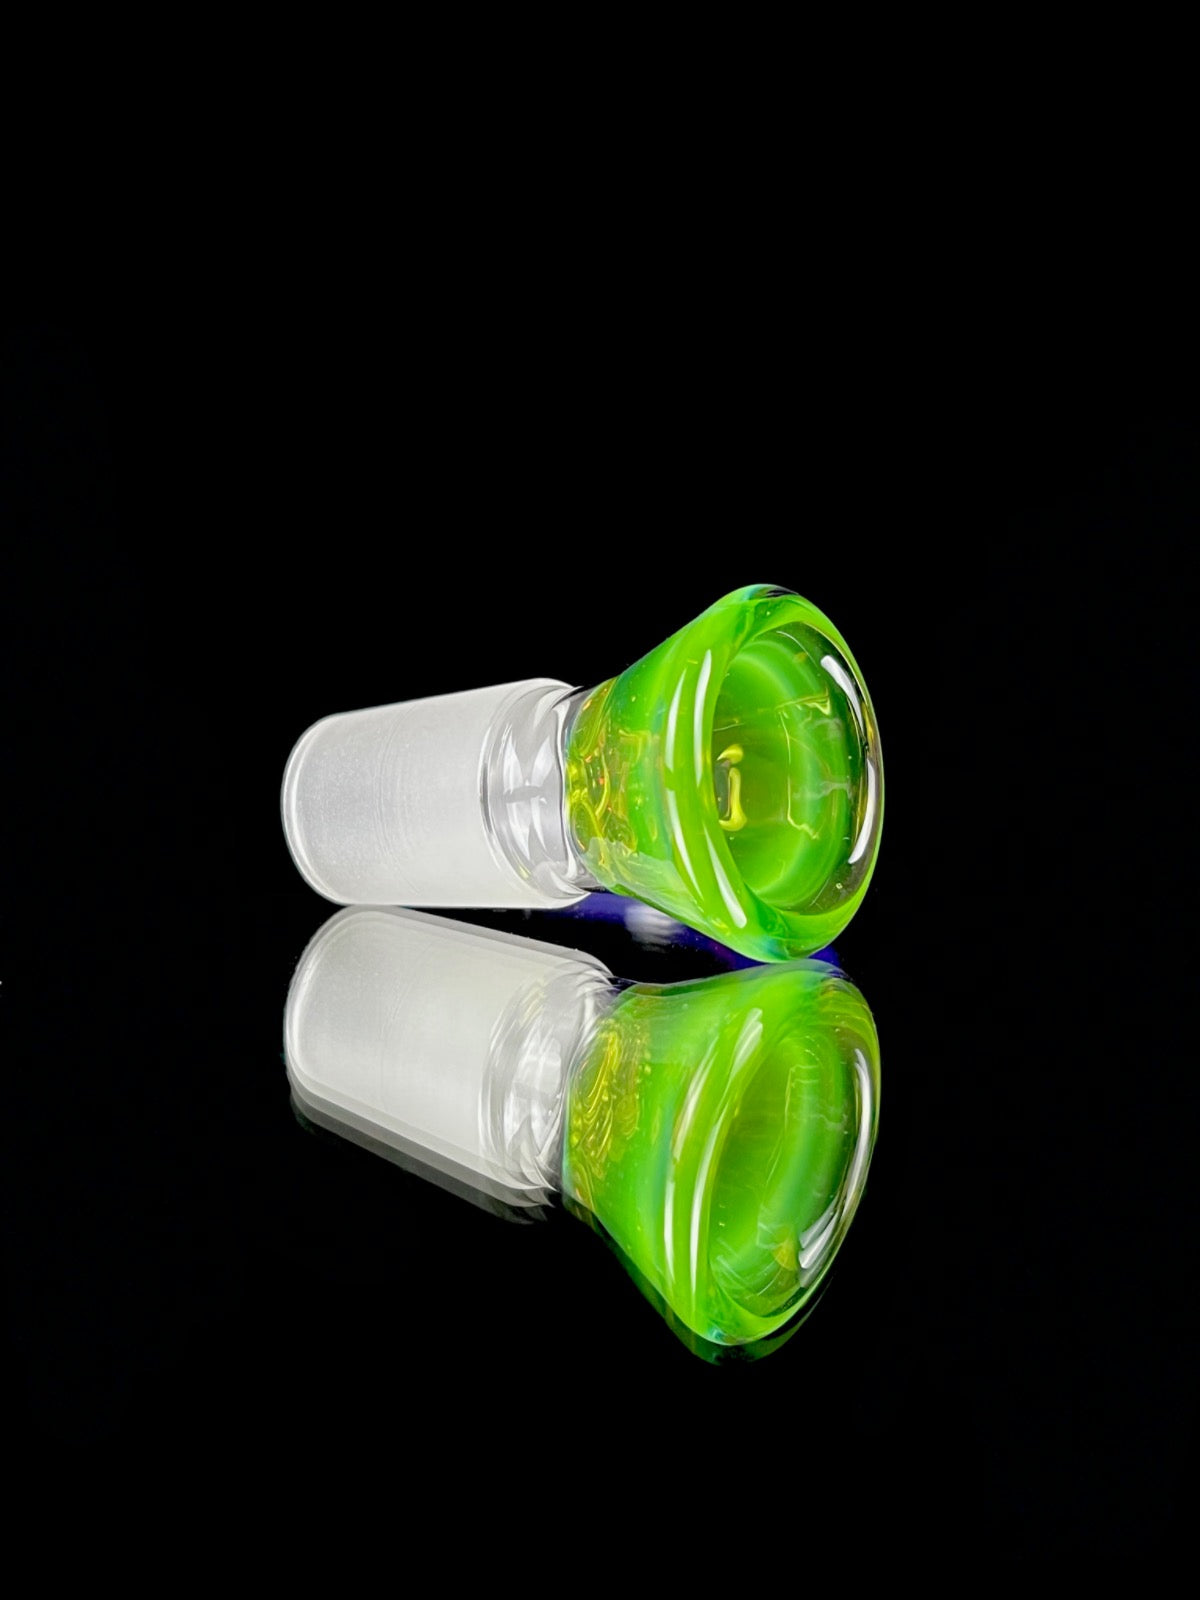 18mm full-accent Green Opal slide with Royal Jelly accents by Welch Glass